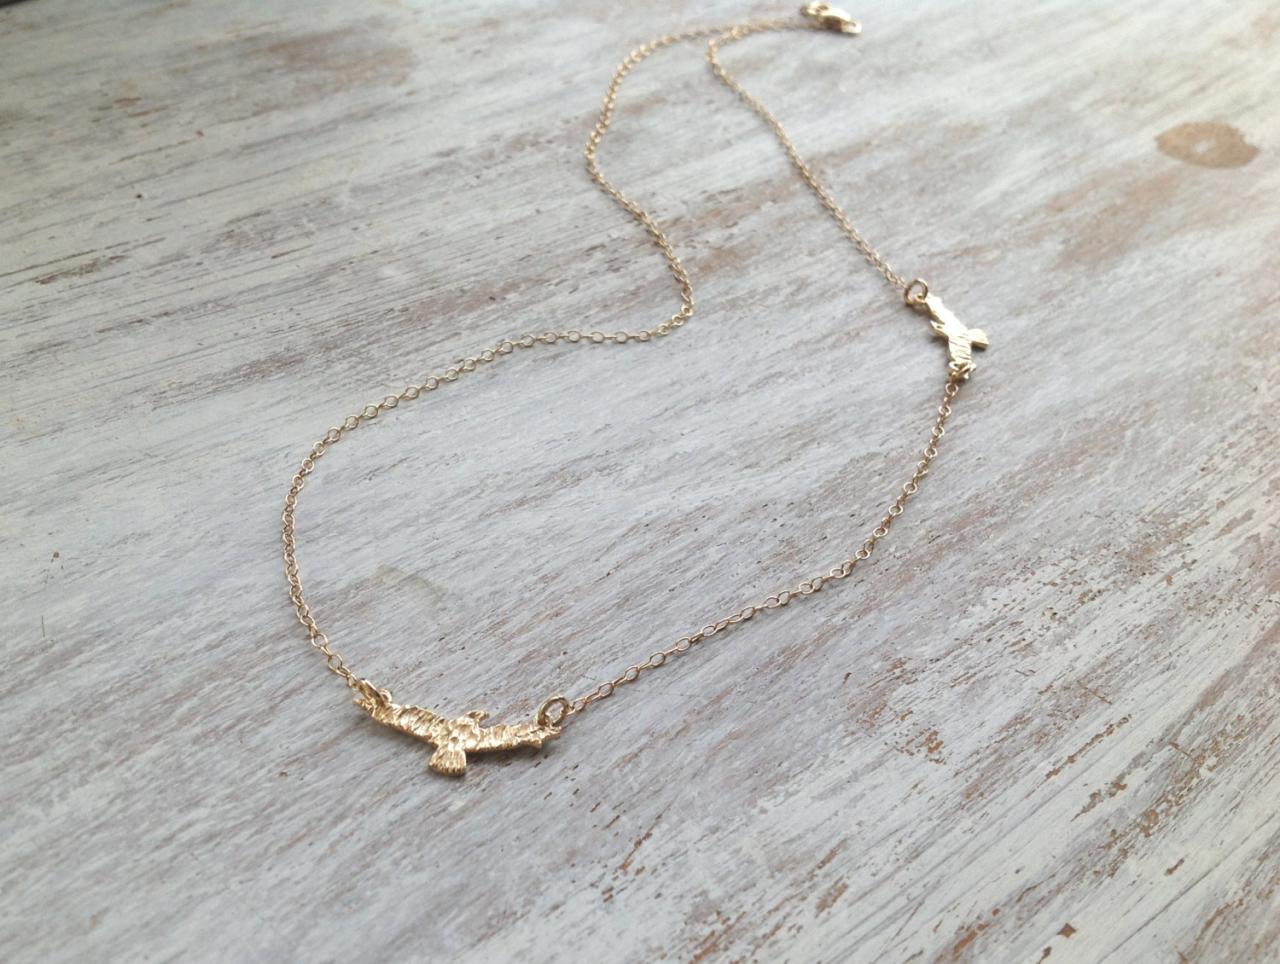 Gold necklace, seagull necklace, gold filled necklace, impressive necklace, delicate necklace - 565